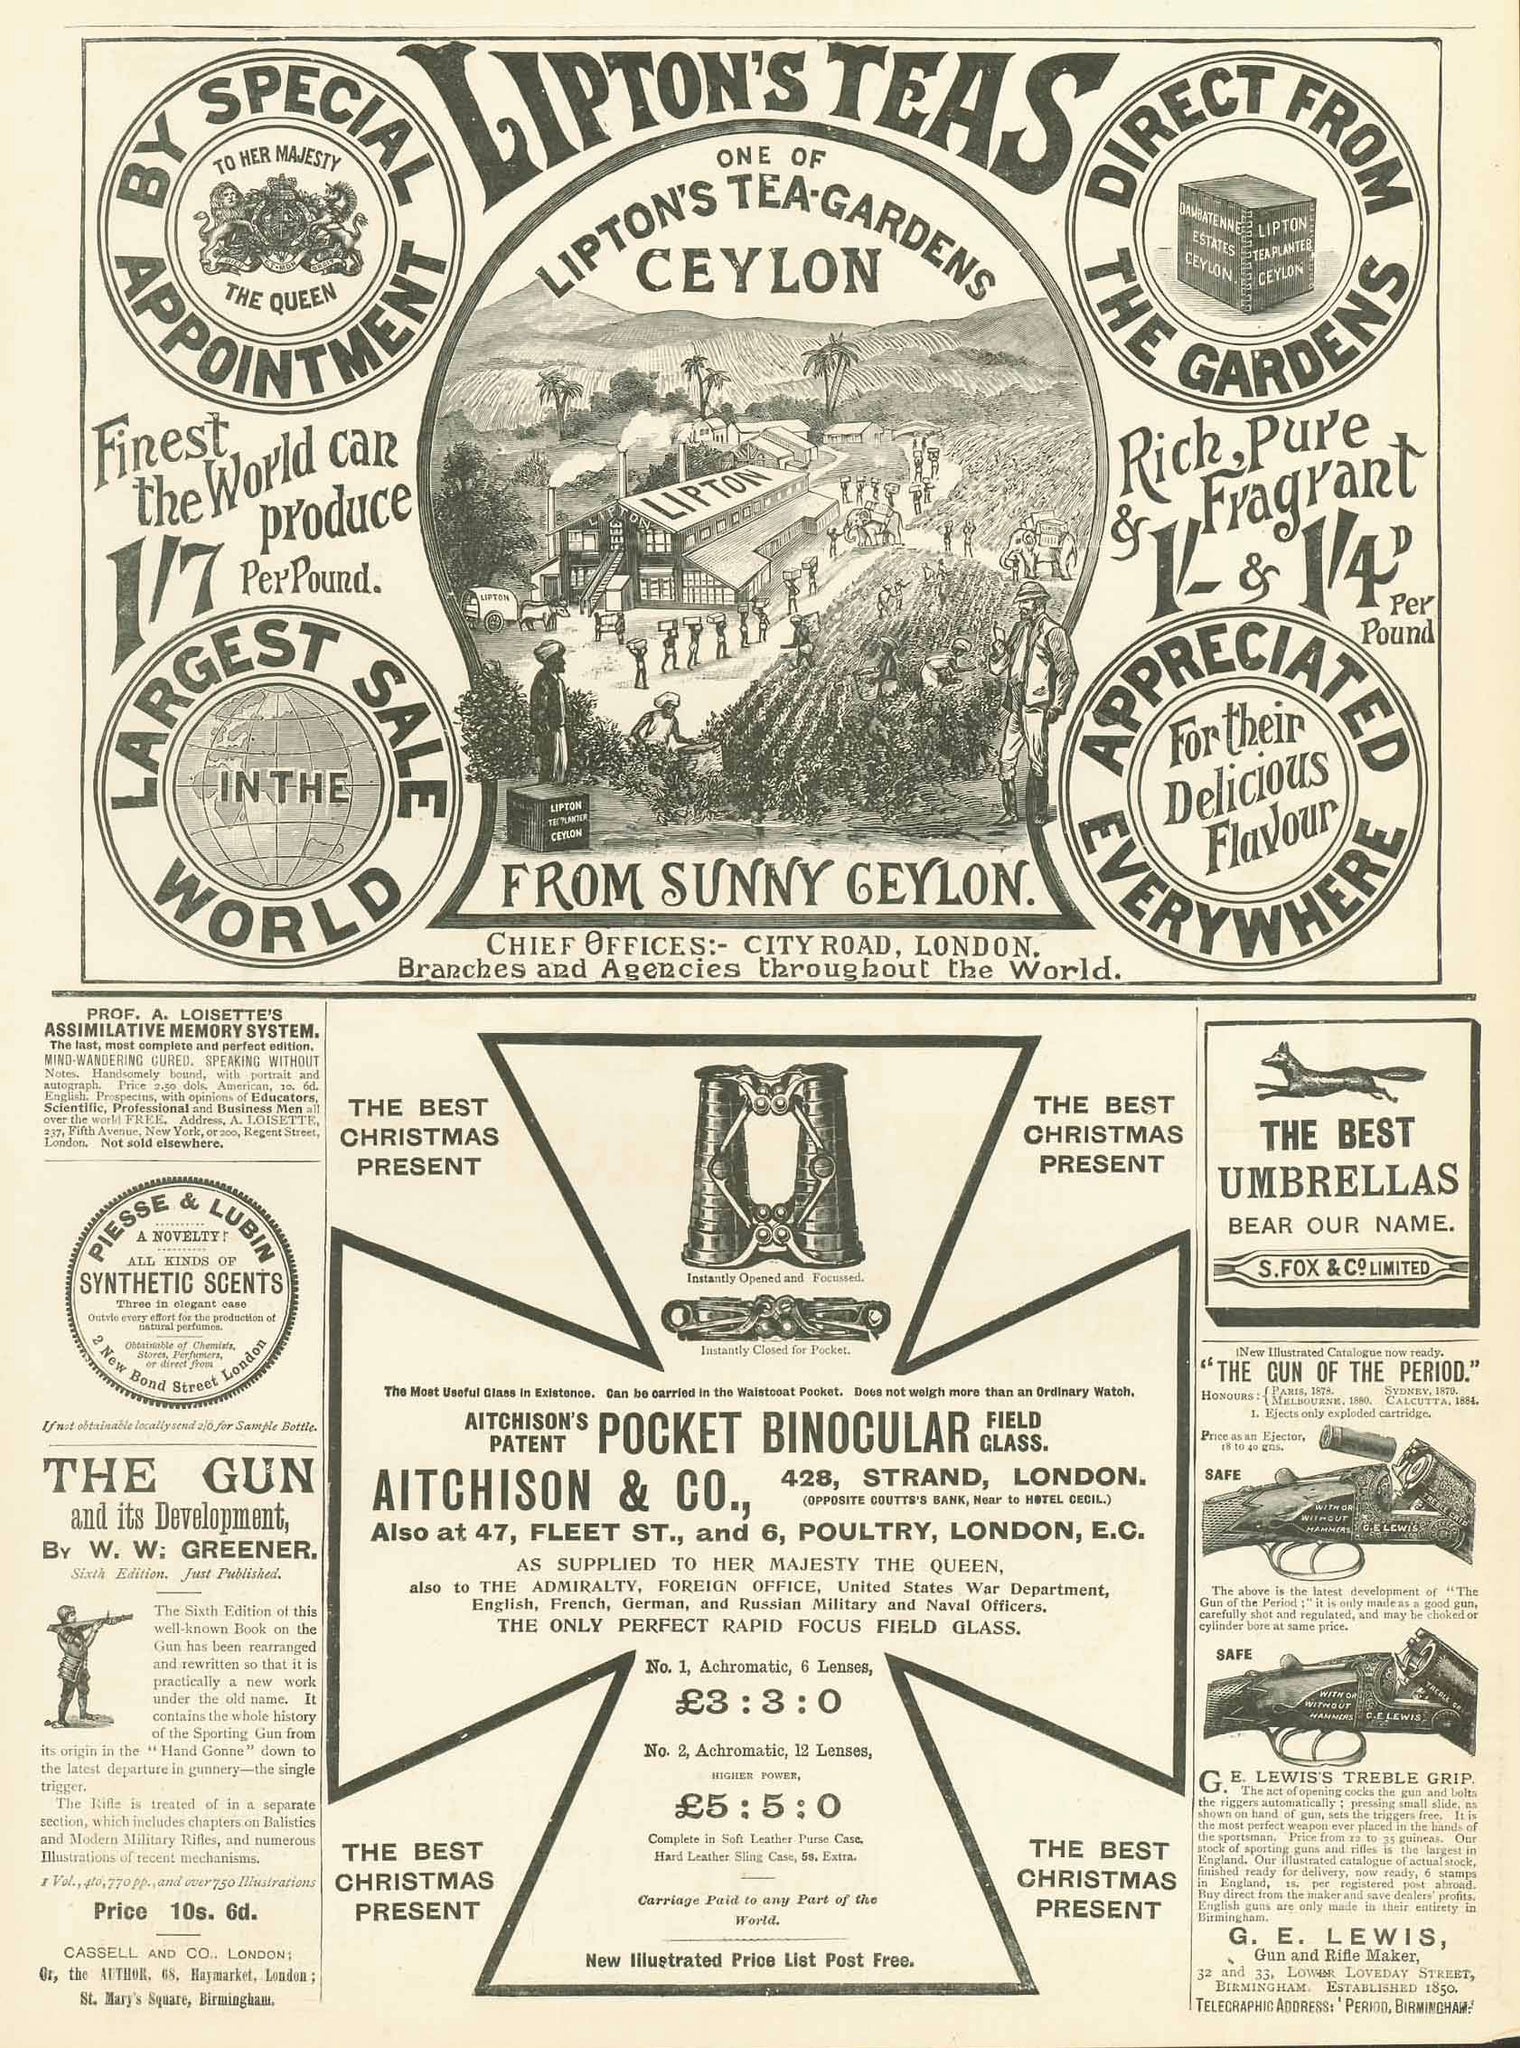 19th century advertising, Ceylon Tea - Srilanka Tea. - "Lipton's Teas. One of Lipton's Tea Gardens Ceylon".  Wood engraving. Lipton's Tea advertisement.  Published in London, dated 1896  One half page advertisement on the full page of the magazine together with other advertisements.  Original antique print 